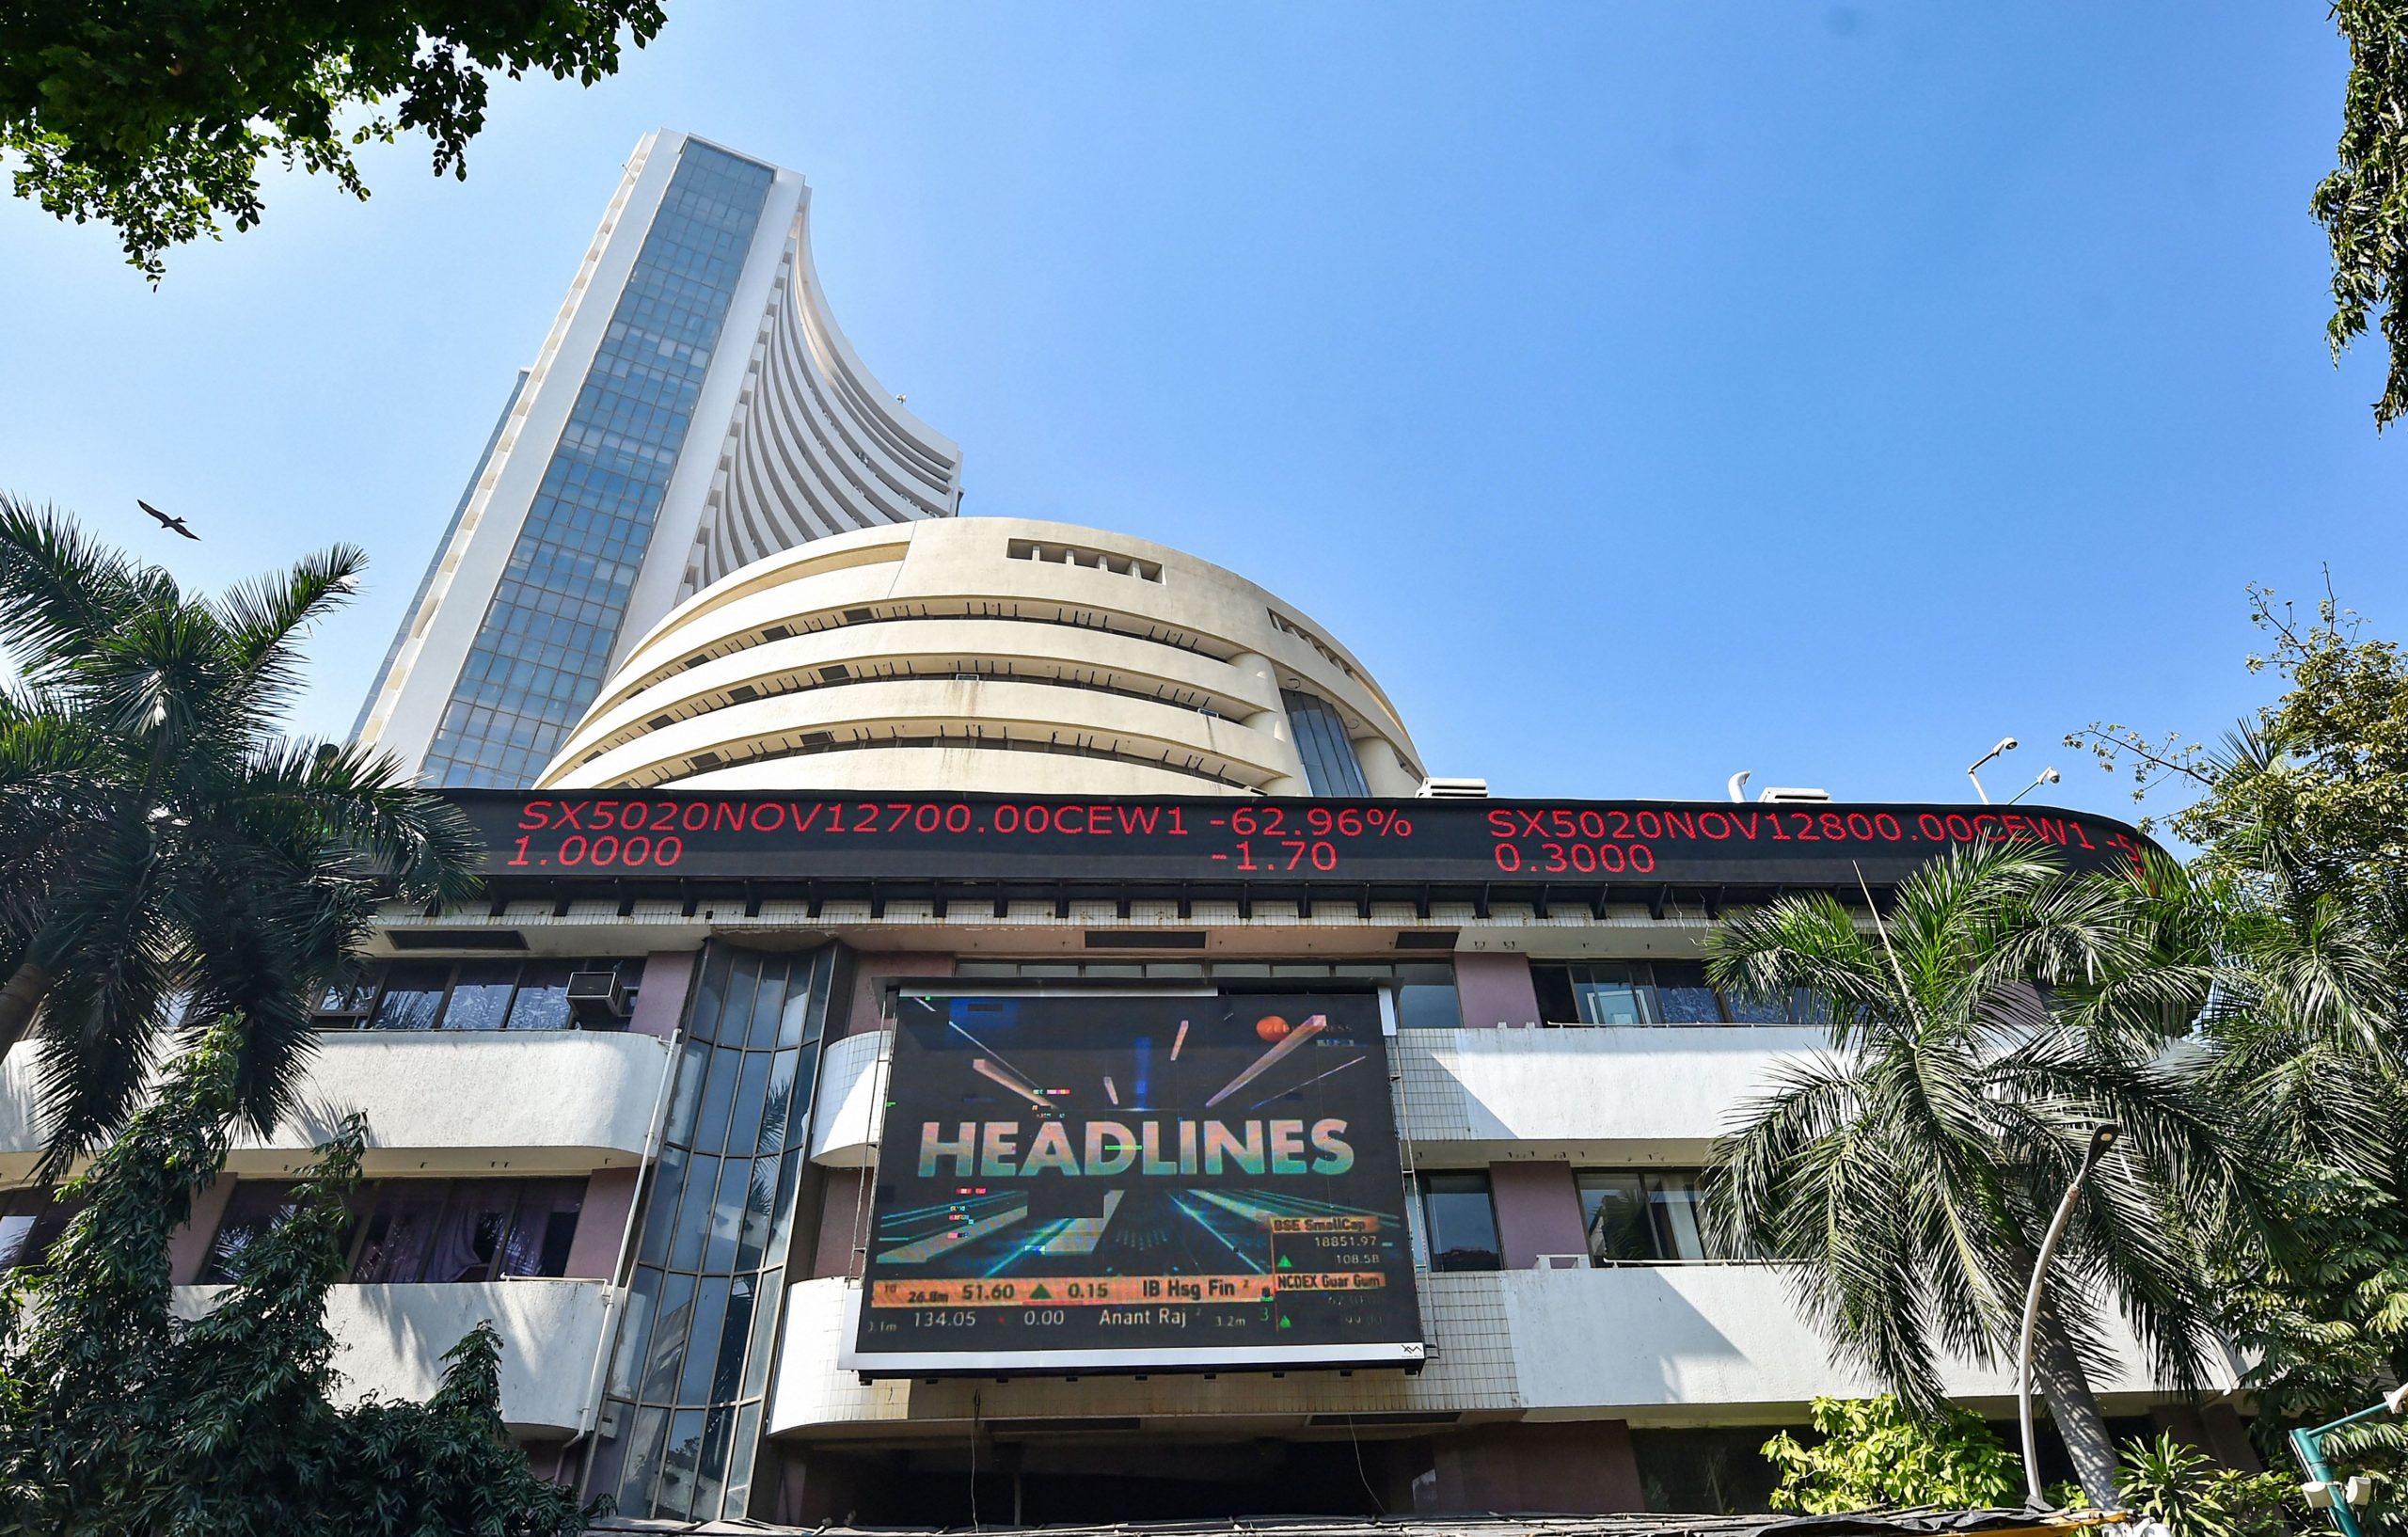 Trending Stocks: Power Grid, HFCL, Bharat Dynamics and others in news today